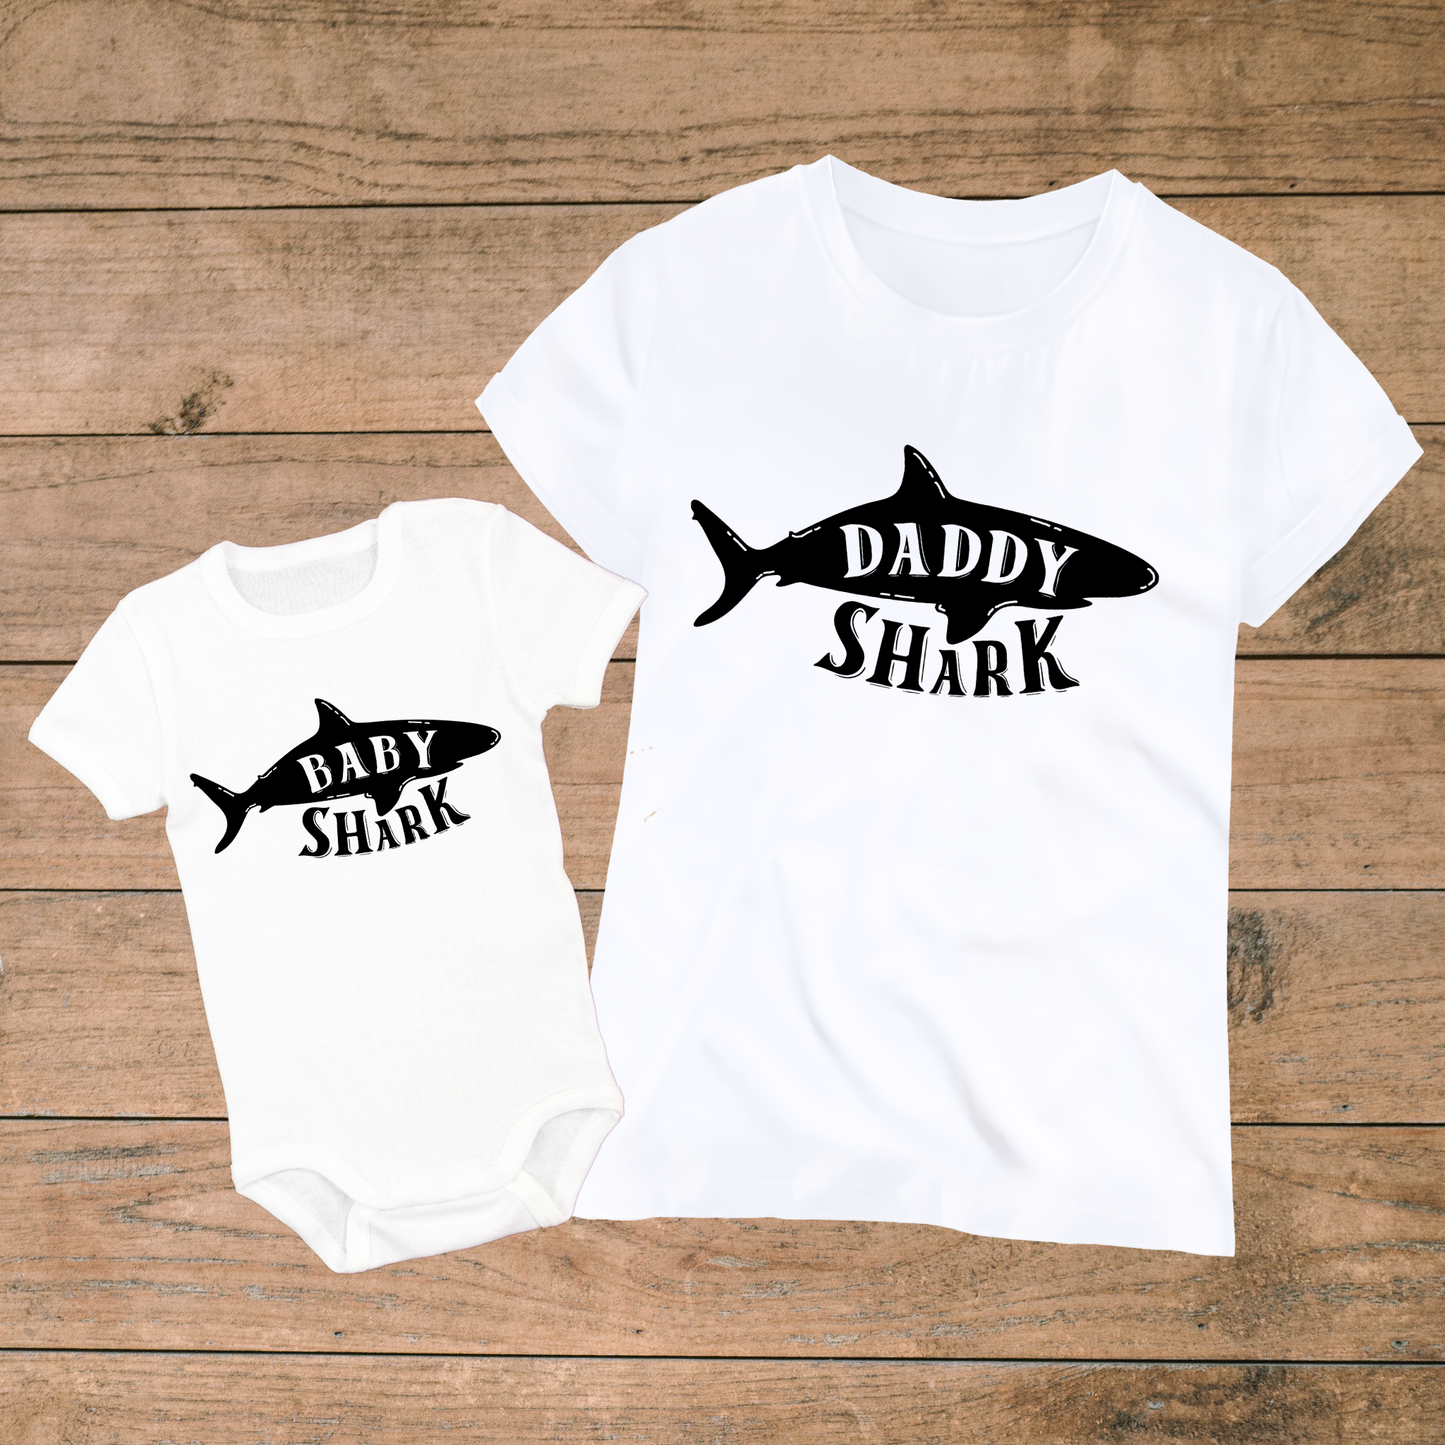 Baby Shark T-Shirts for Dad and Baby: Father and Baby Matching Outfits